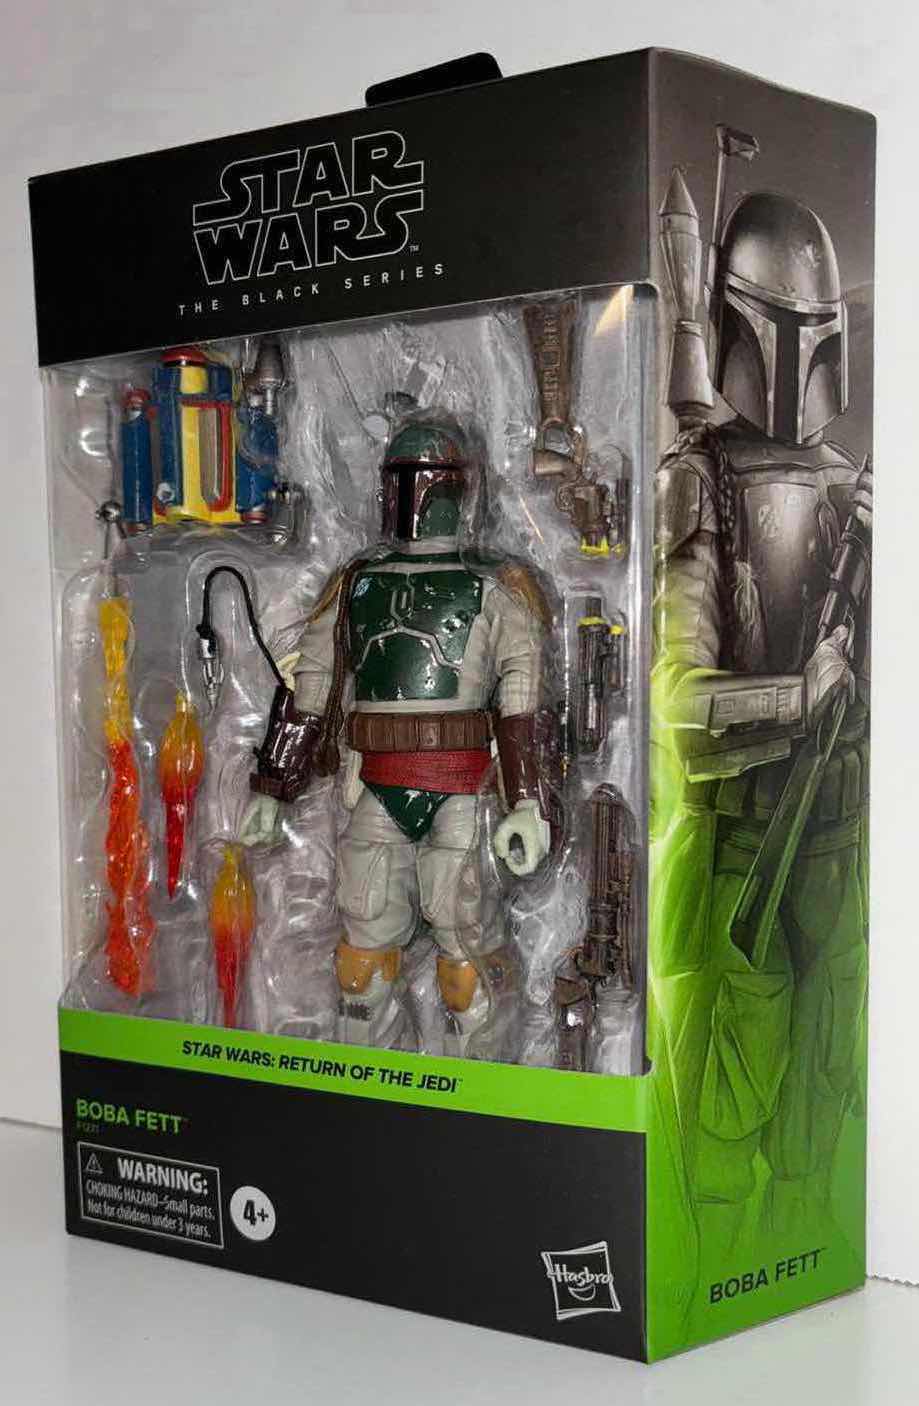 Photo 1 of NEW STAR WARS THE BLACK SERIES ACTION FIGURE & ACCESSORIES, STAR WARS: RETURN OF THE JEDI “BOBA FETT” (1)